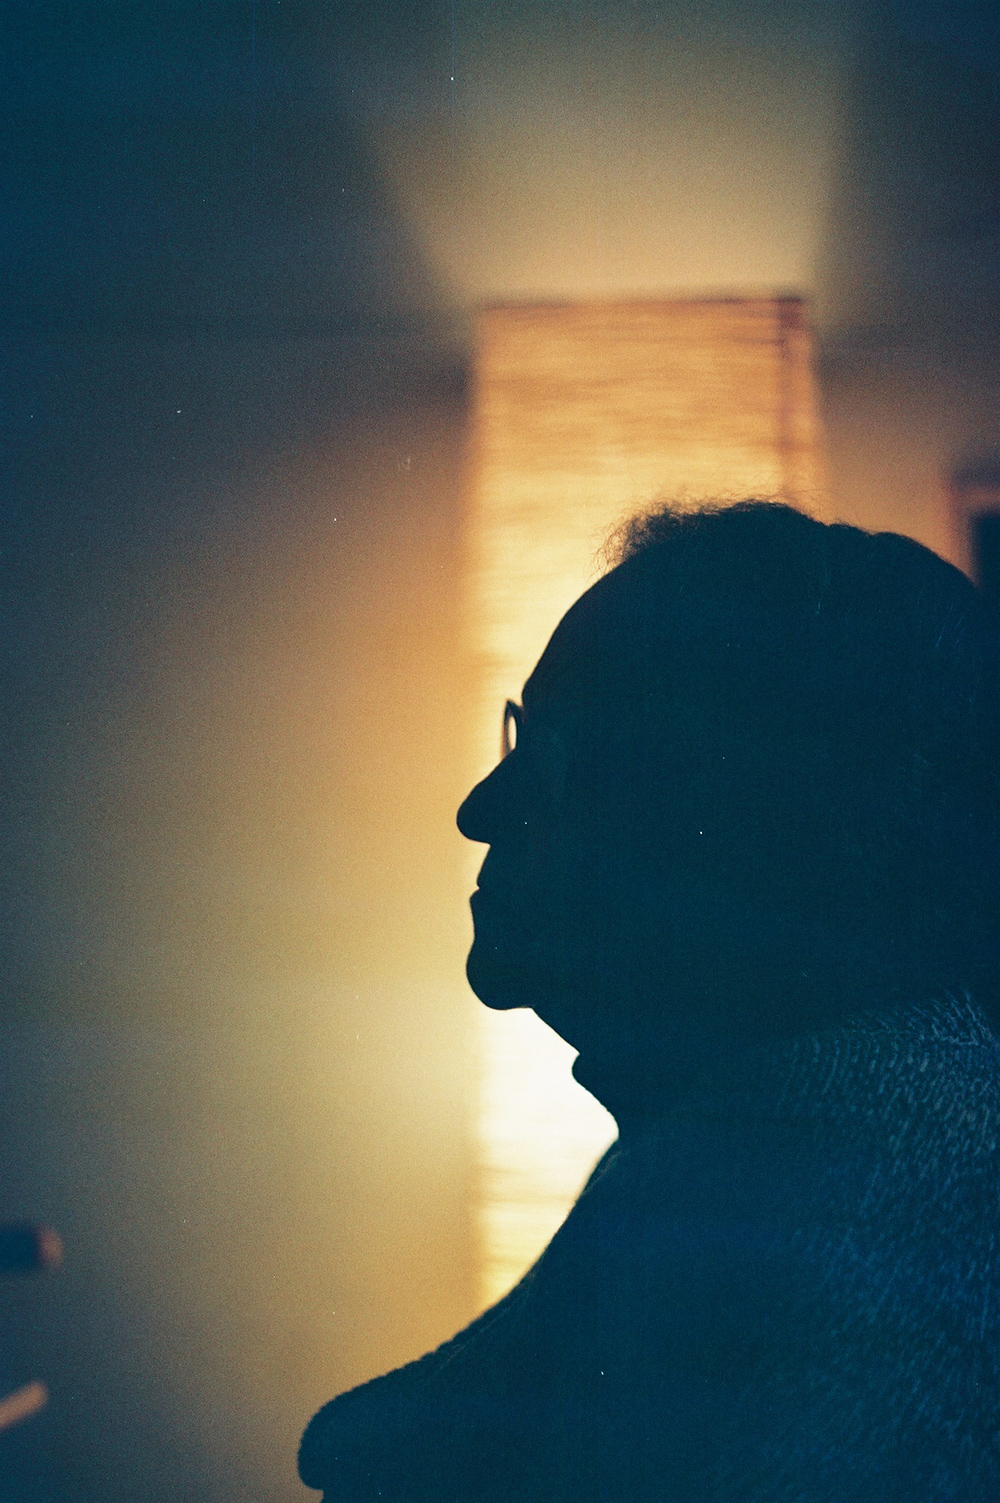 Analog photo of a woman's profile silhouetted against a lamp behind her.